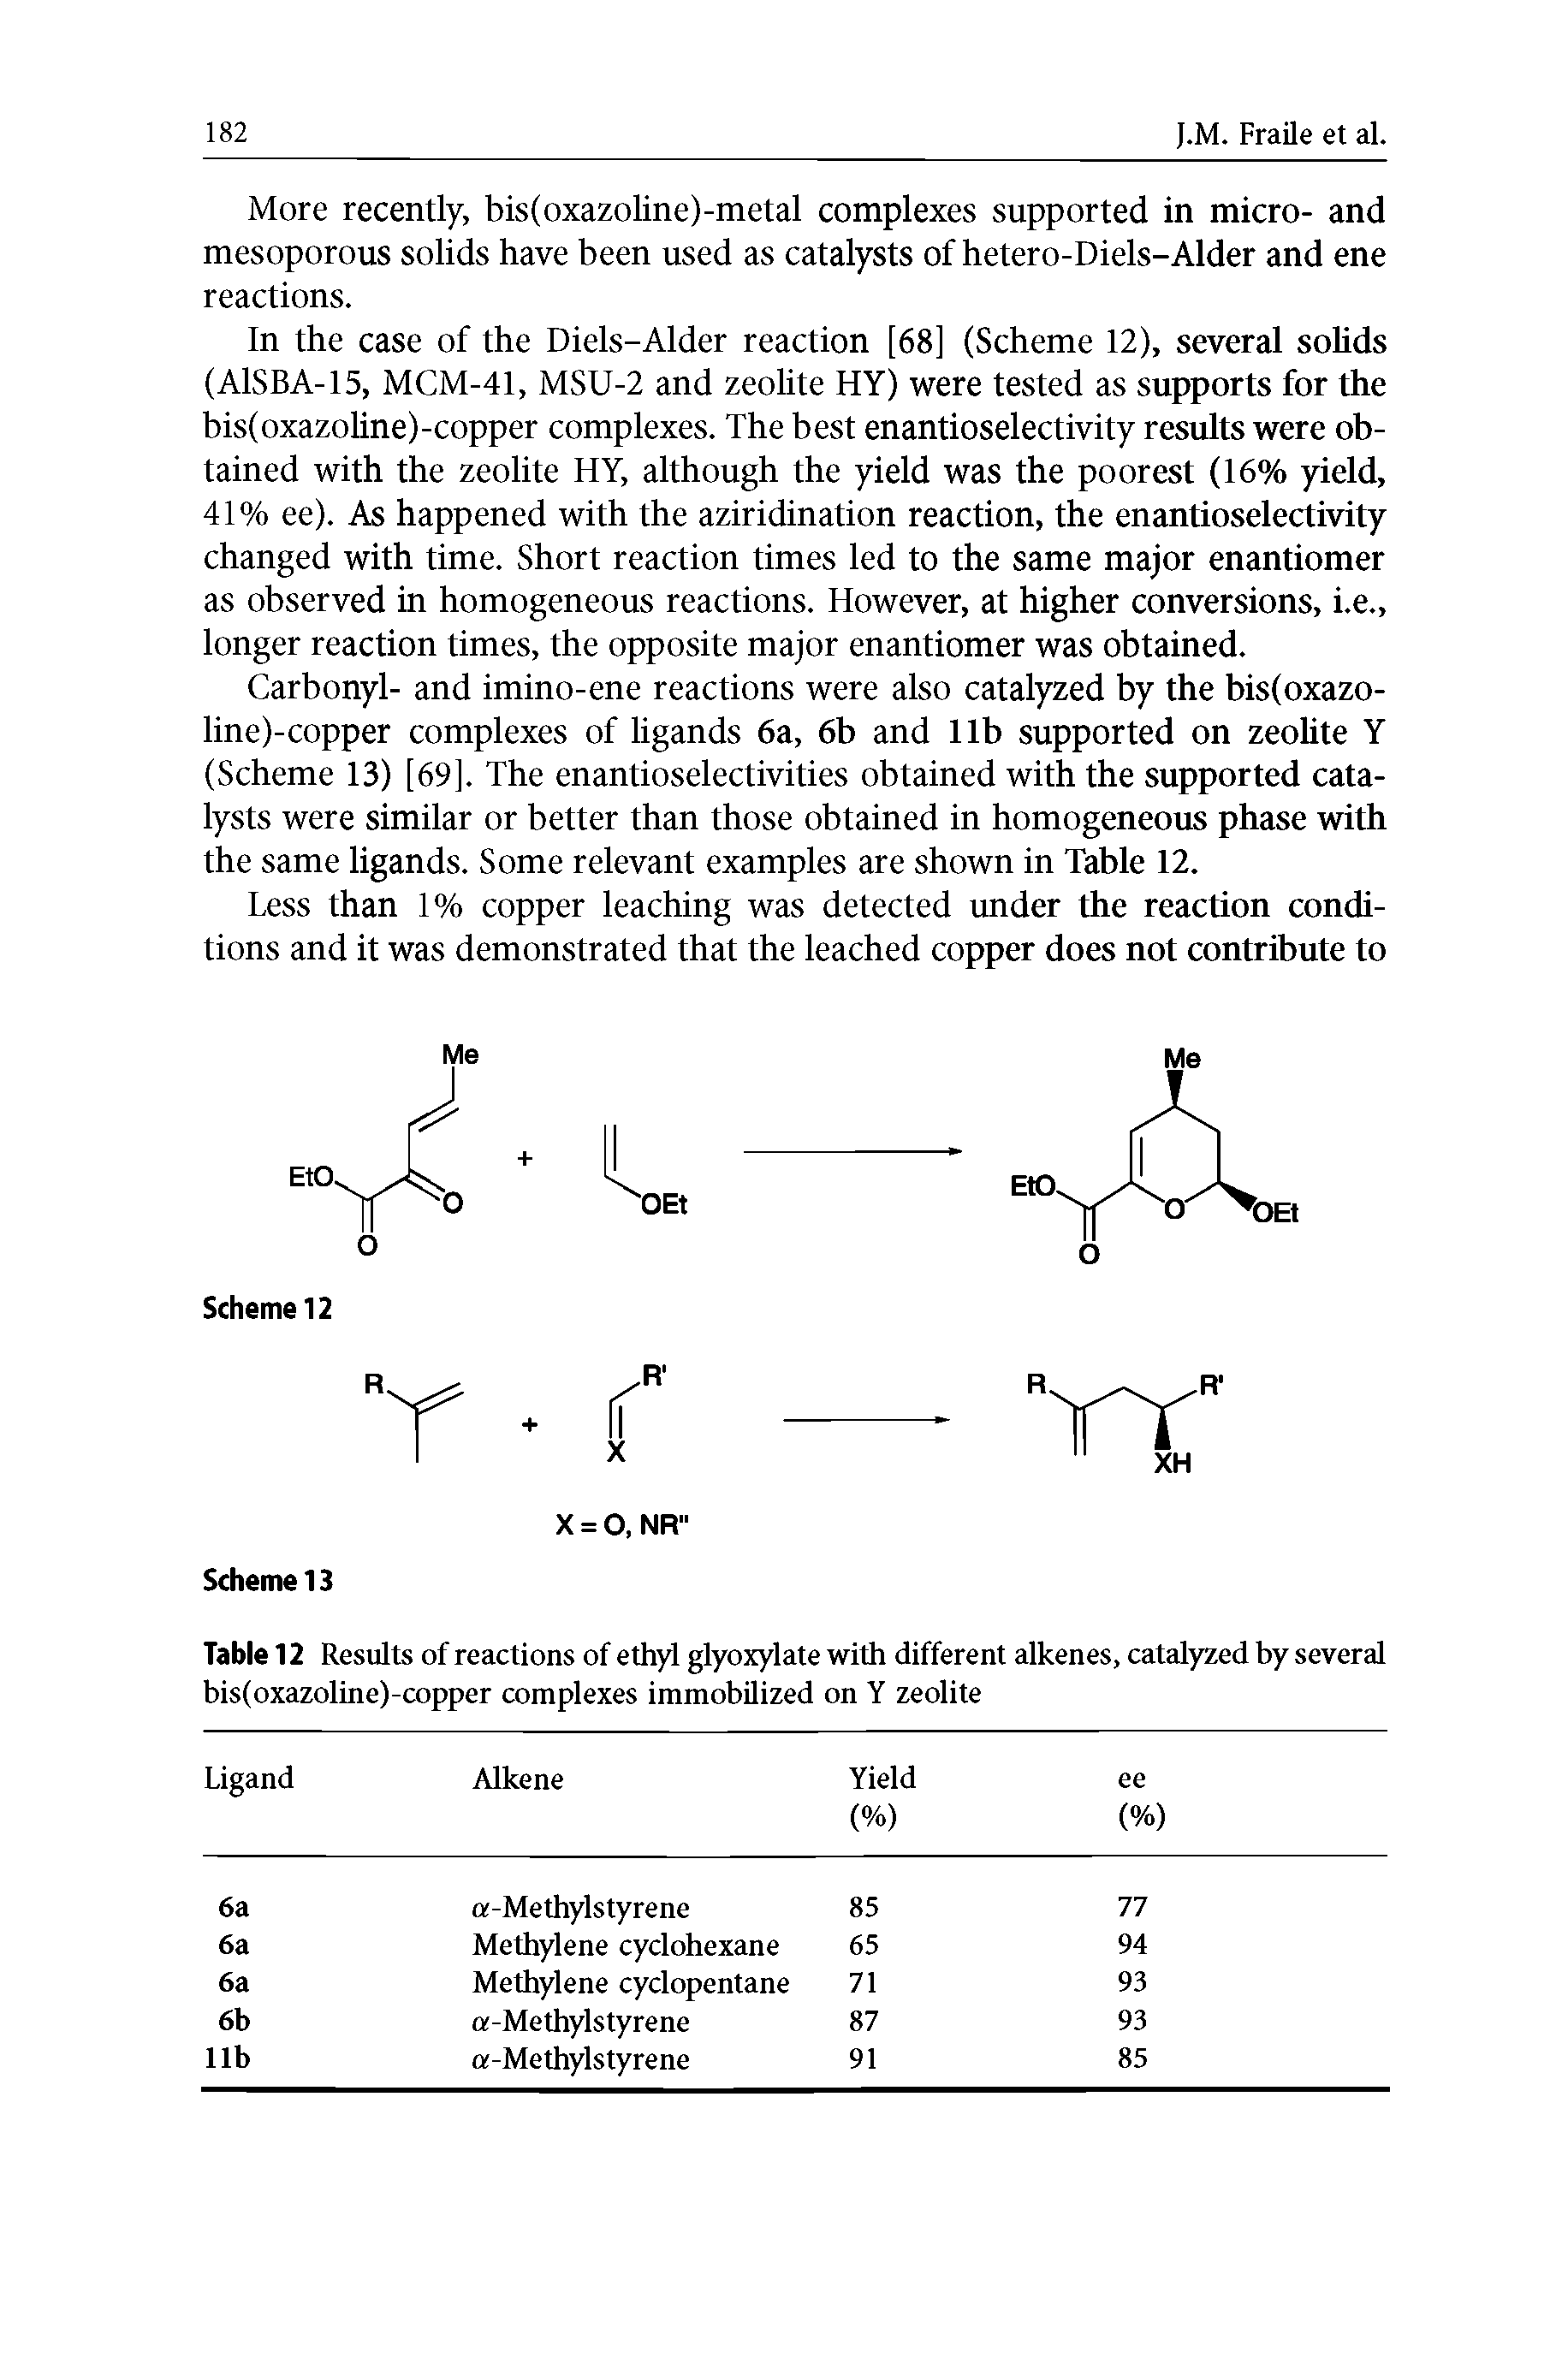 Table 12 Results of reactions of ethyl glyoxylate with different alkenes, catalyzed by several bis(oxazoline)-copper complexes immobilized on Y zeolite...